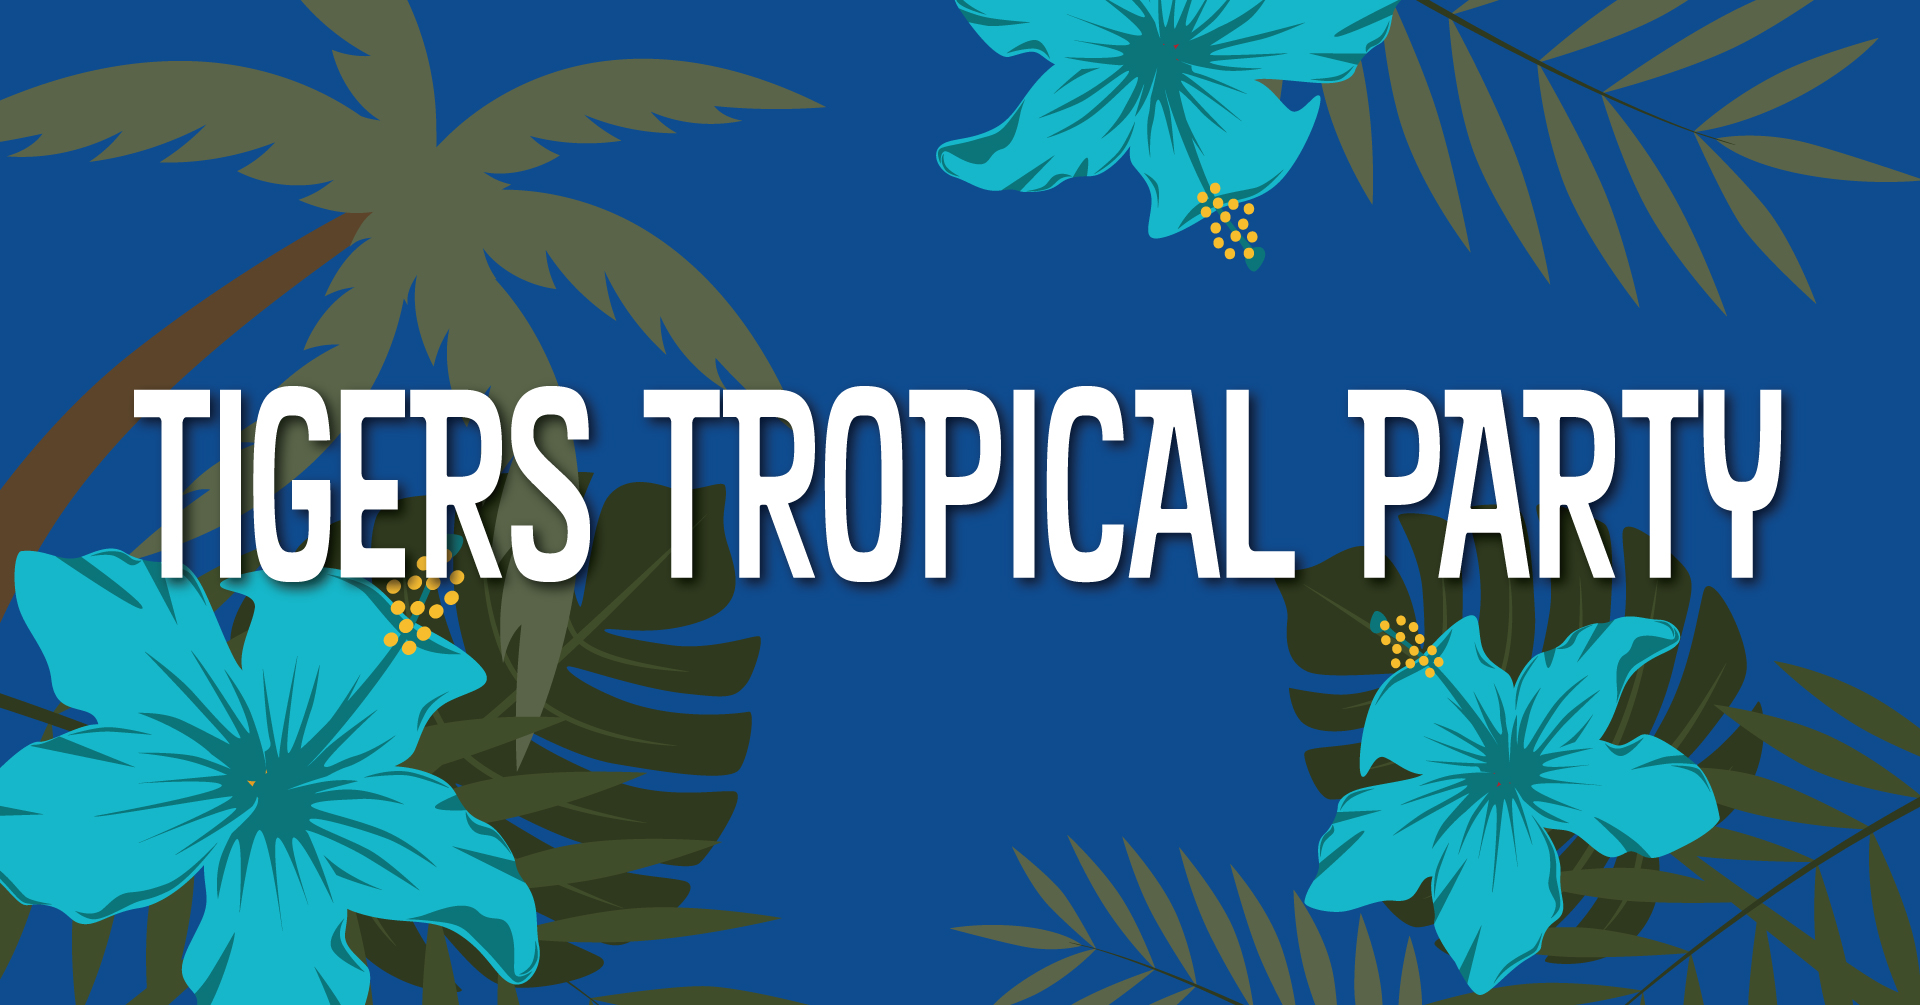 Tigers Tropical Party - Campus Recreation